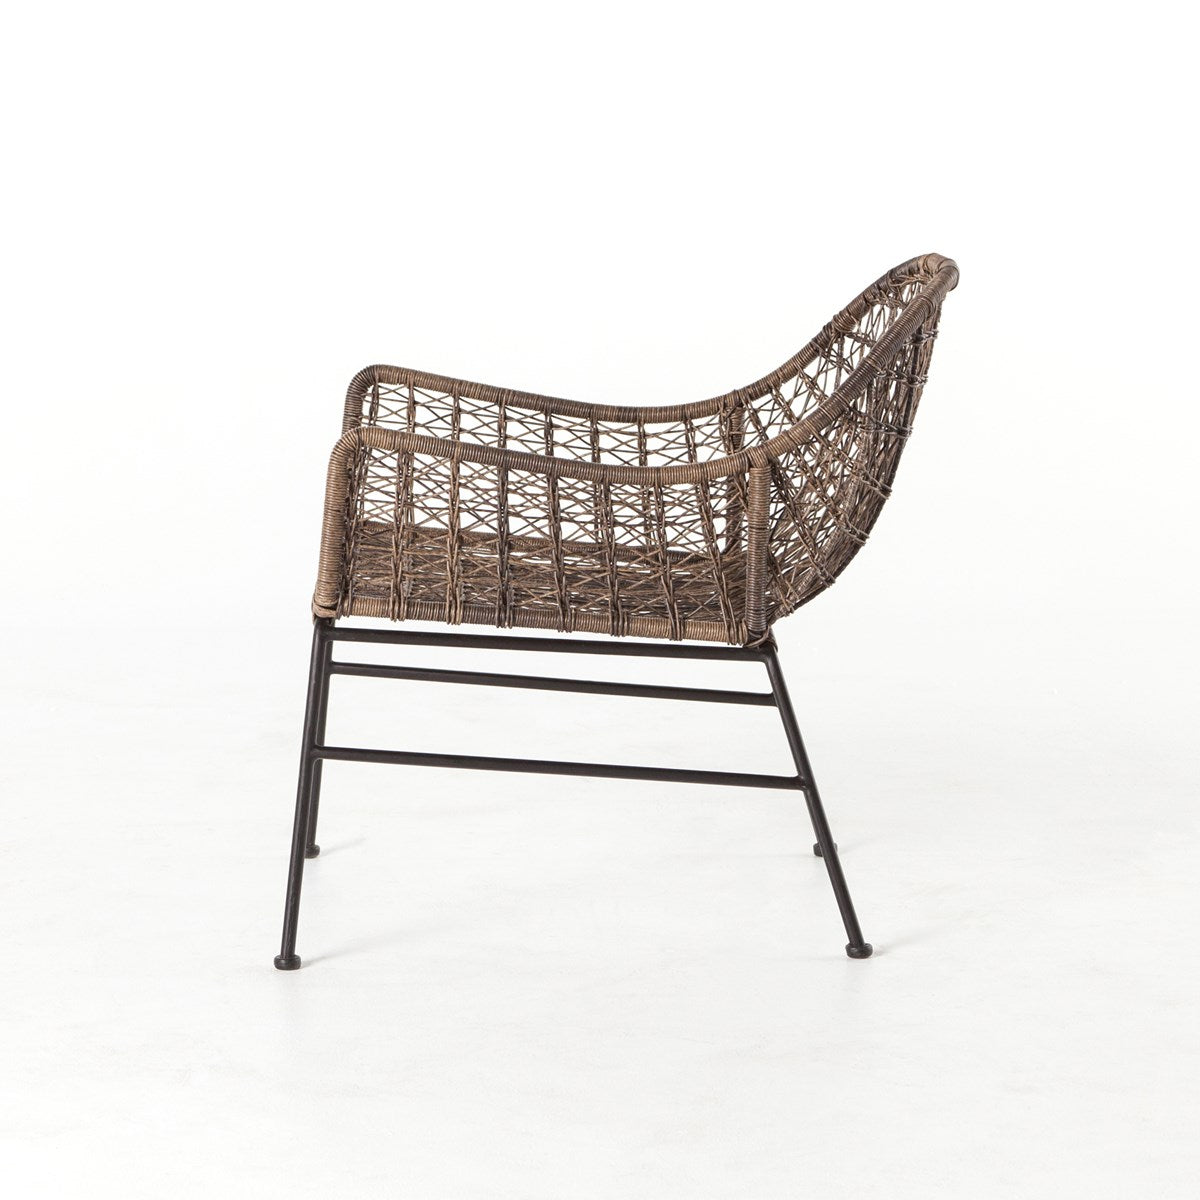 Bandera Outdoor Woven Club Chair Chair Four Hands     Four Hands, Burke Decor, Mid Century Modern Furniture, Old Bones Furniture Company, Old Bones Co, Modern Mid Century, Designer Furniture, https://www.oldbonesco.com/